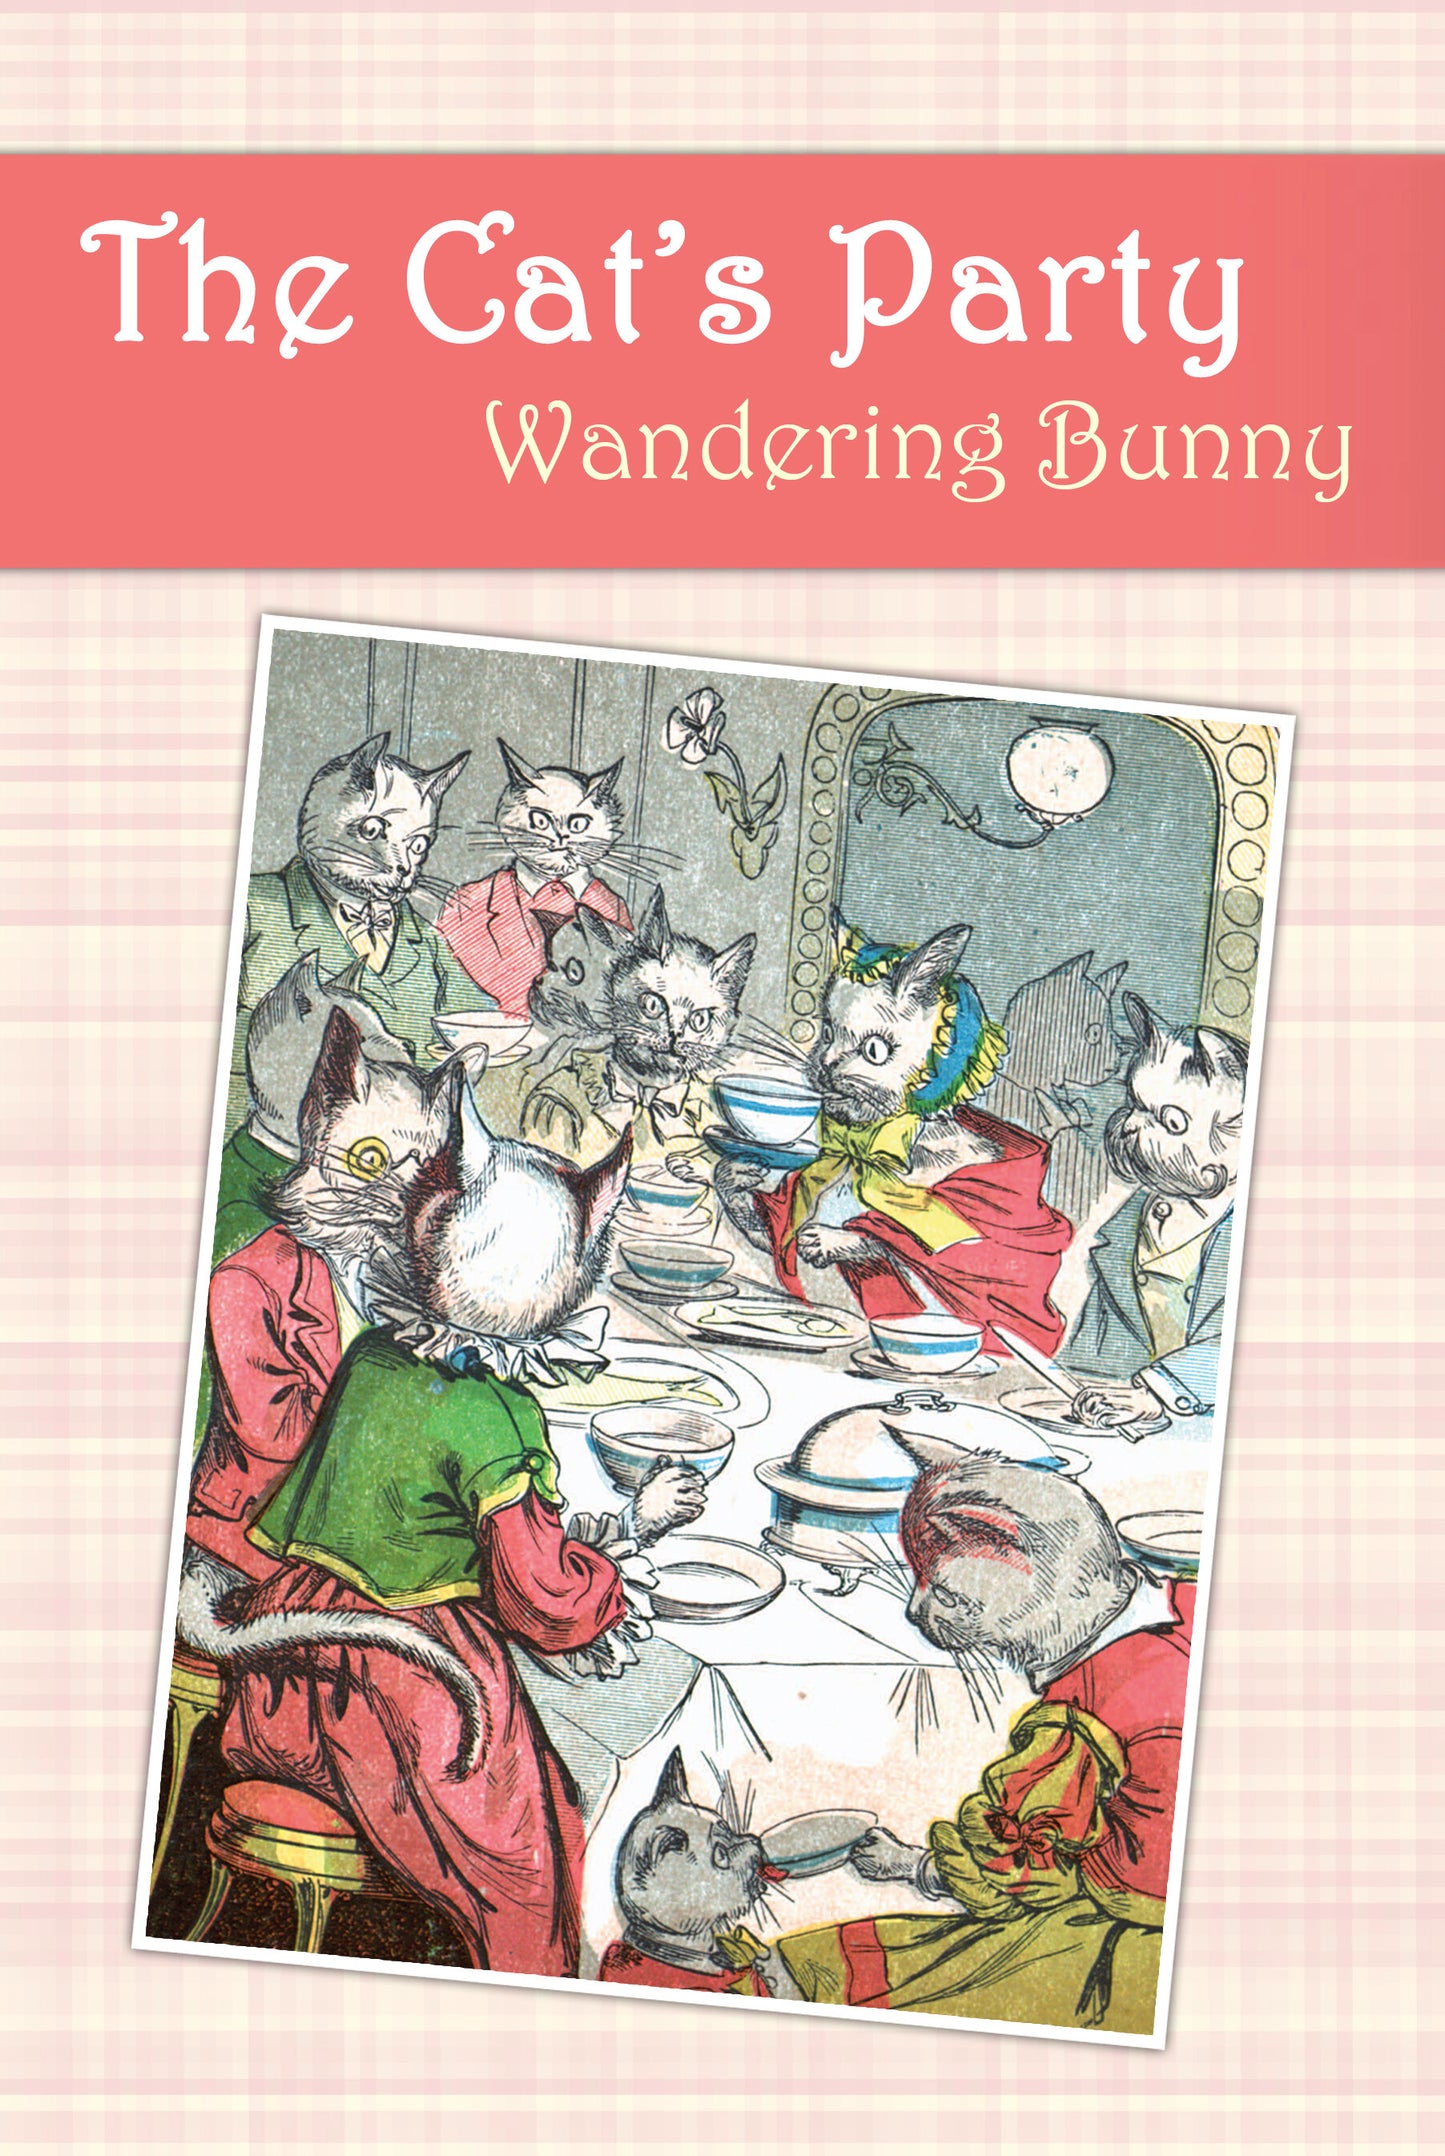 The Cat's Party, Wandering Bunny